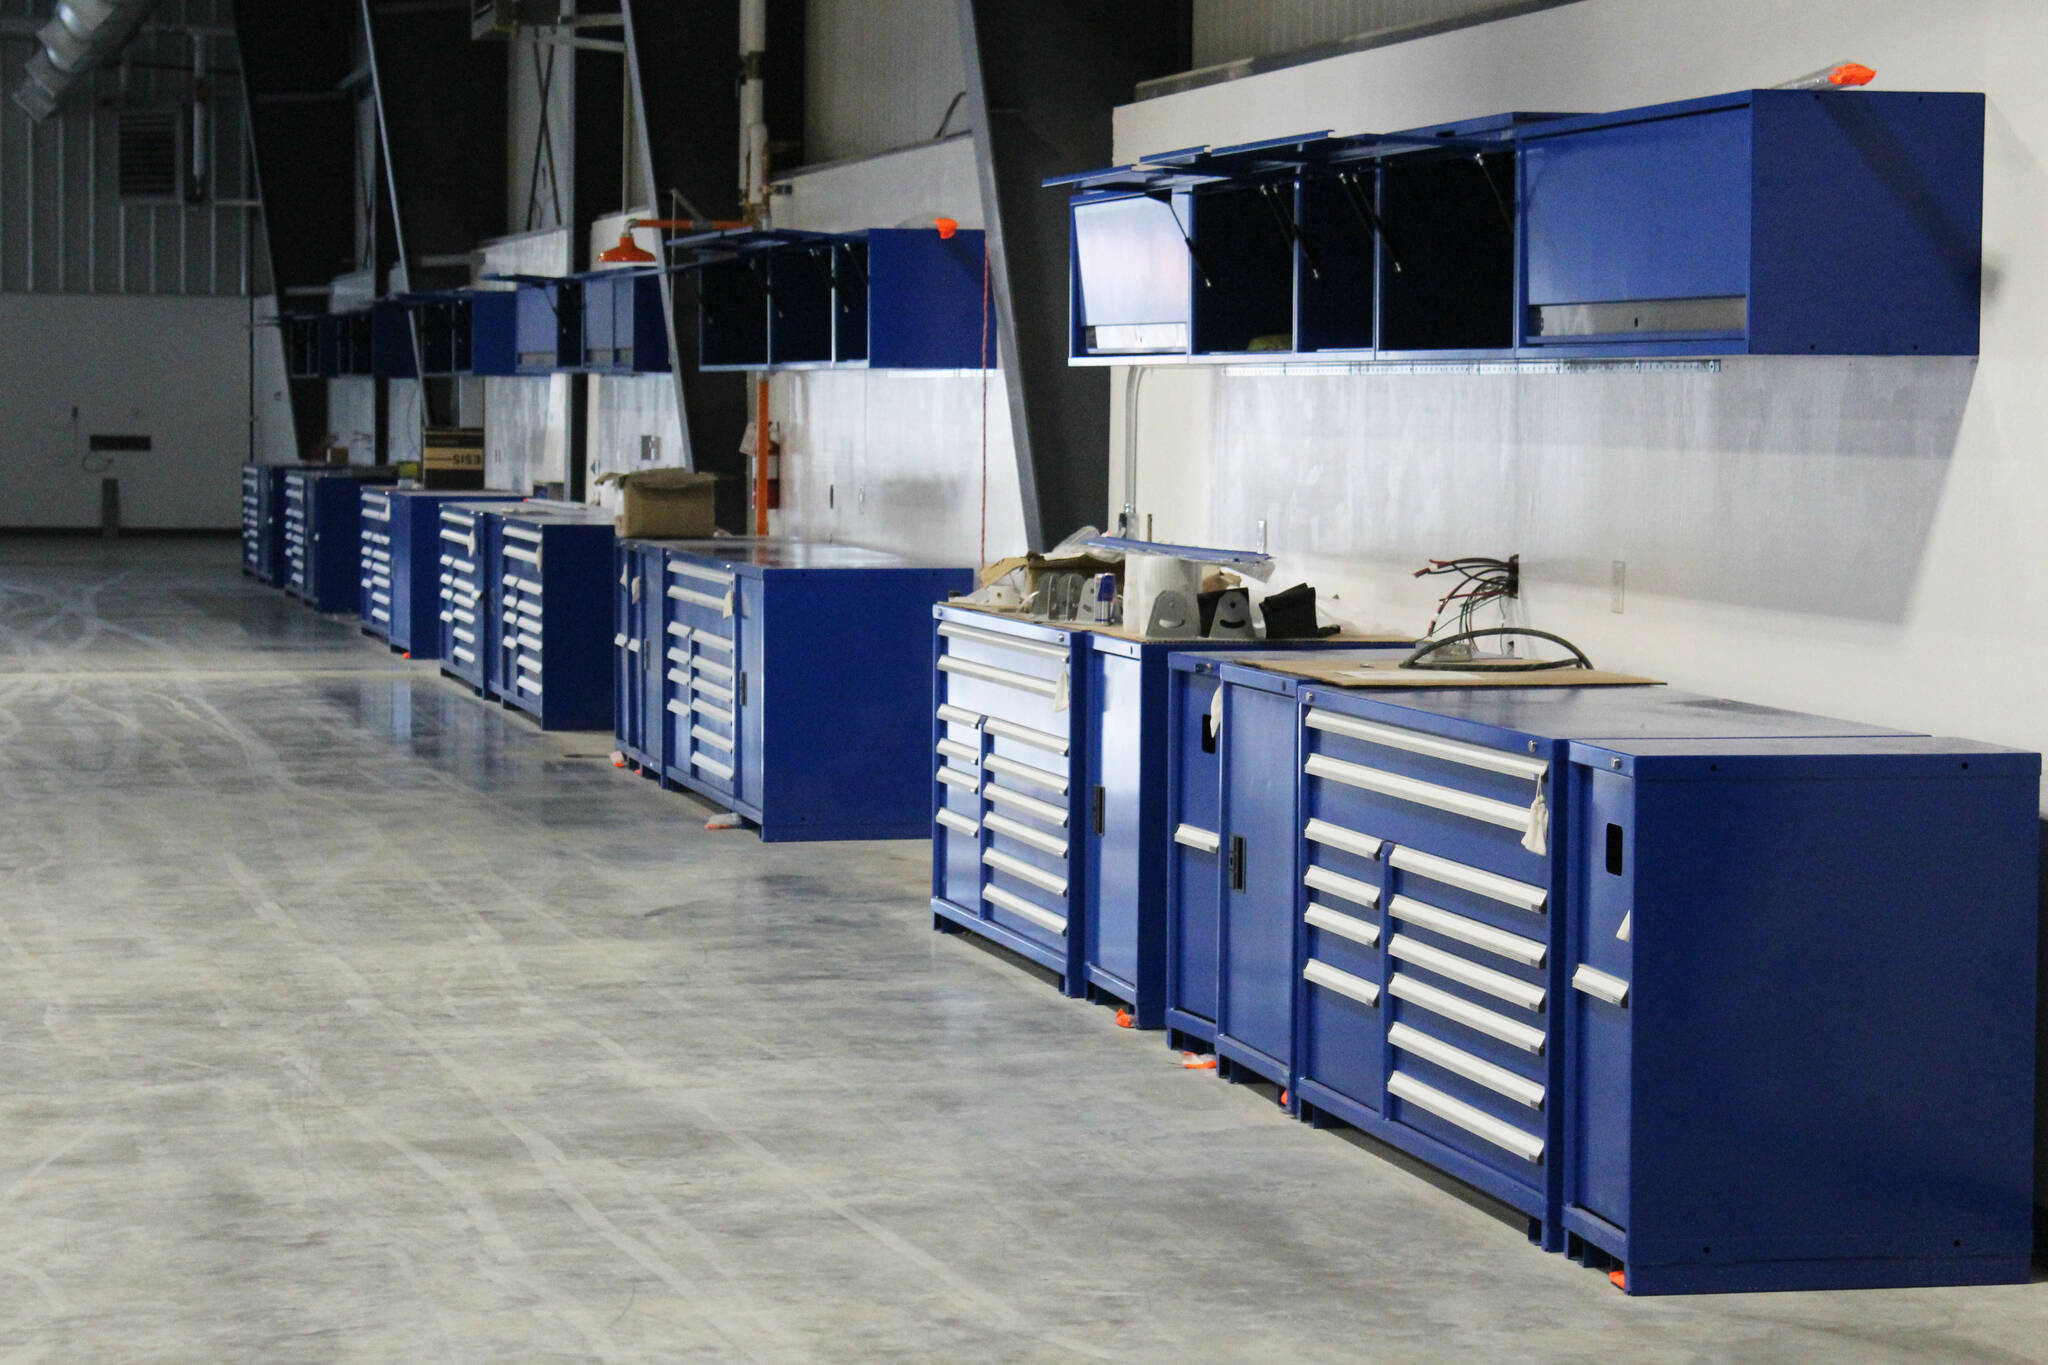 Toolboxes await use at Kendall’s new service facility and dealership on Wednesday, Aug. 17, 2023, in Soldotna, Alaska. (Ashlyn O’Hara/Peninsula Clarion)